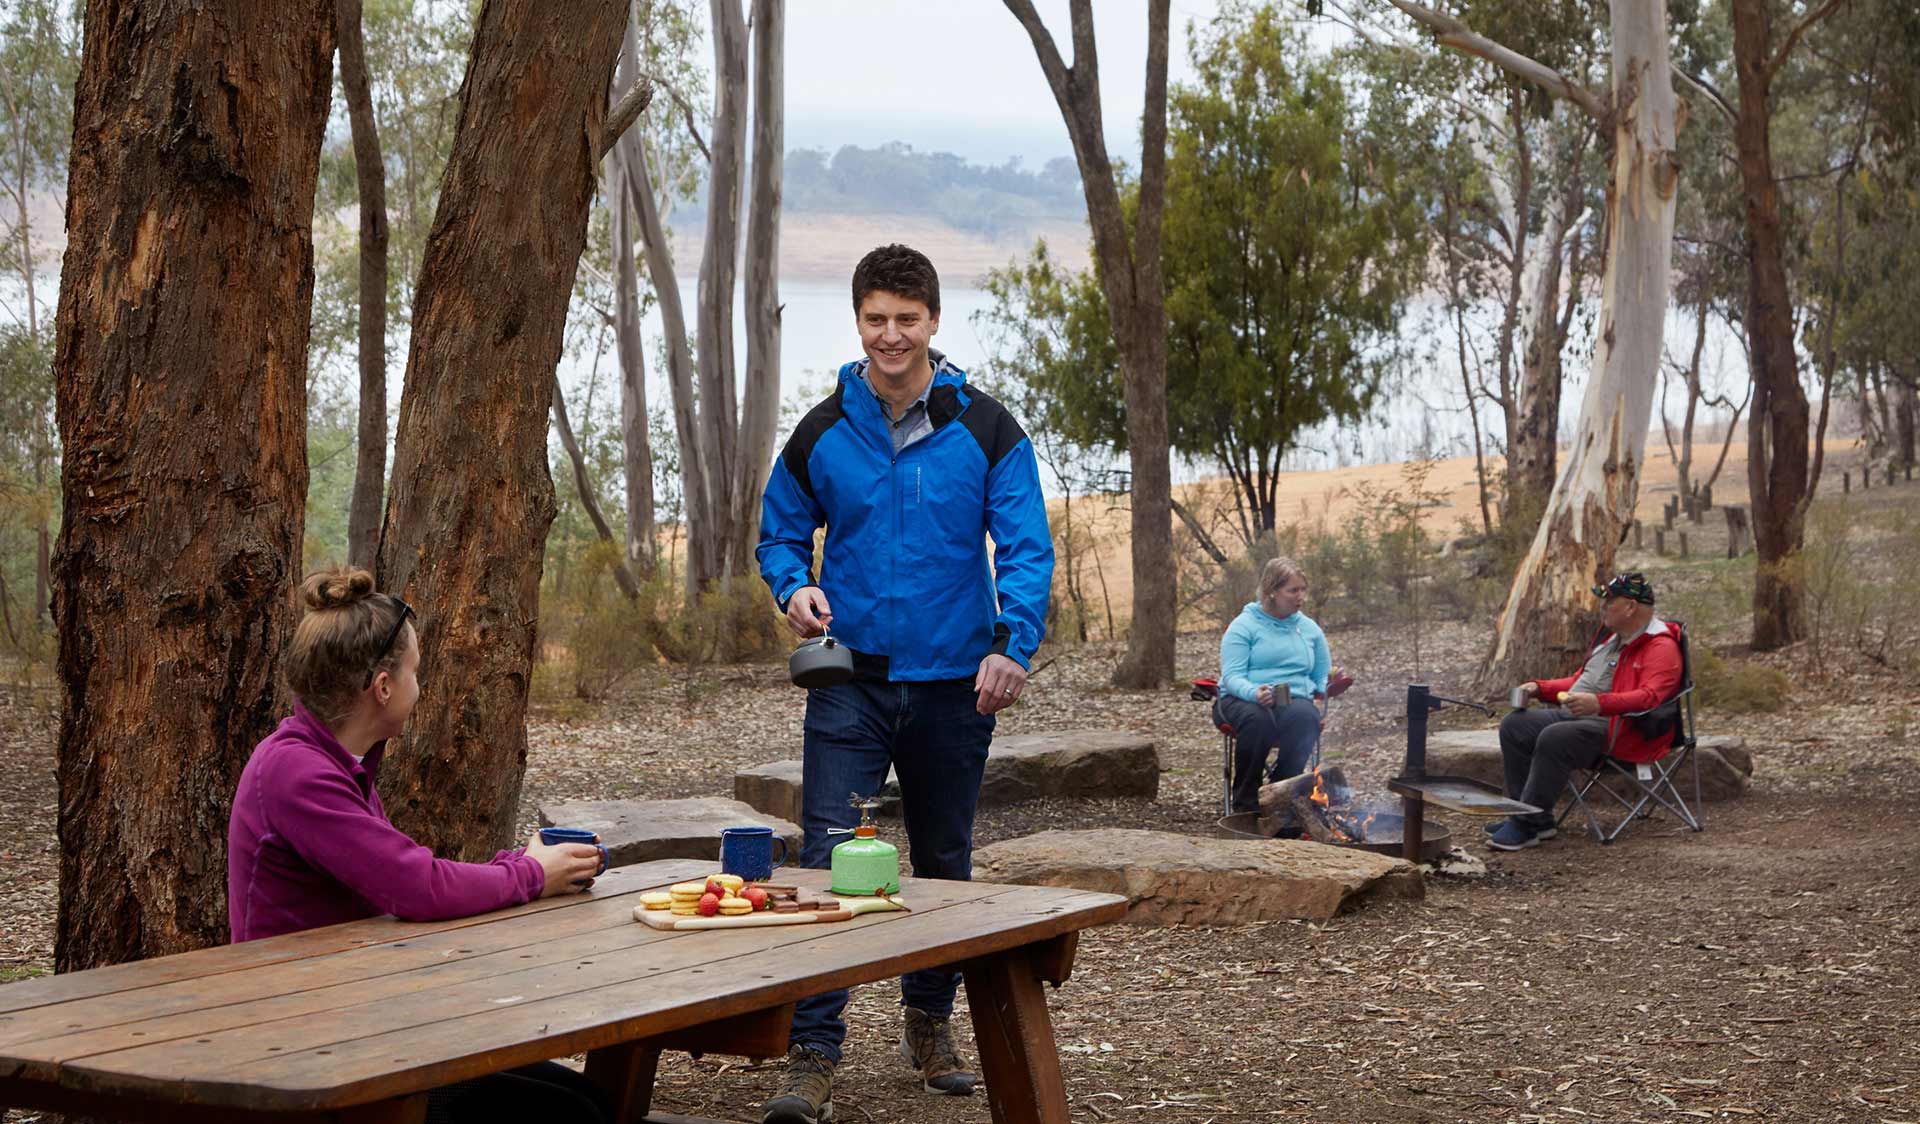 A man brings a kettle to the picnic table where his partner is sitting, while an older couple sit around a campfire in the background.